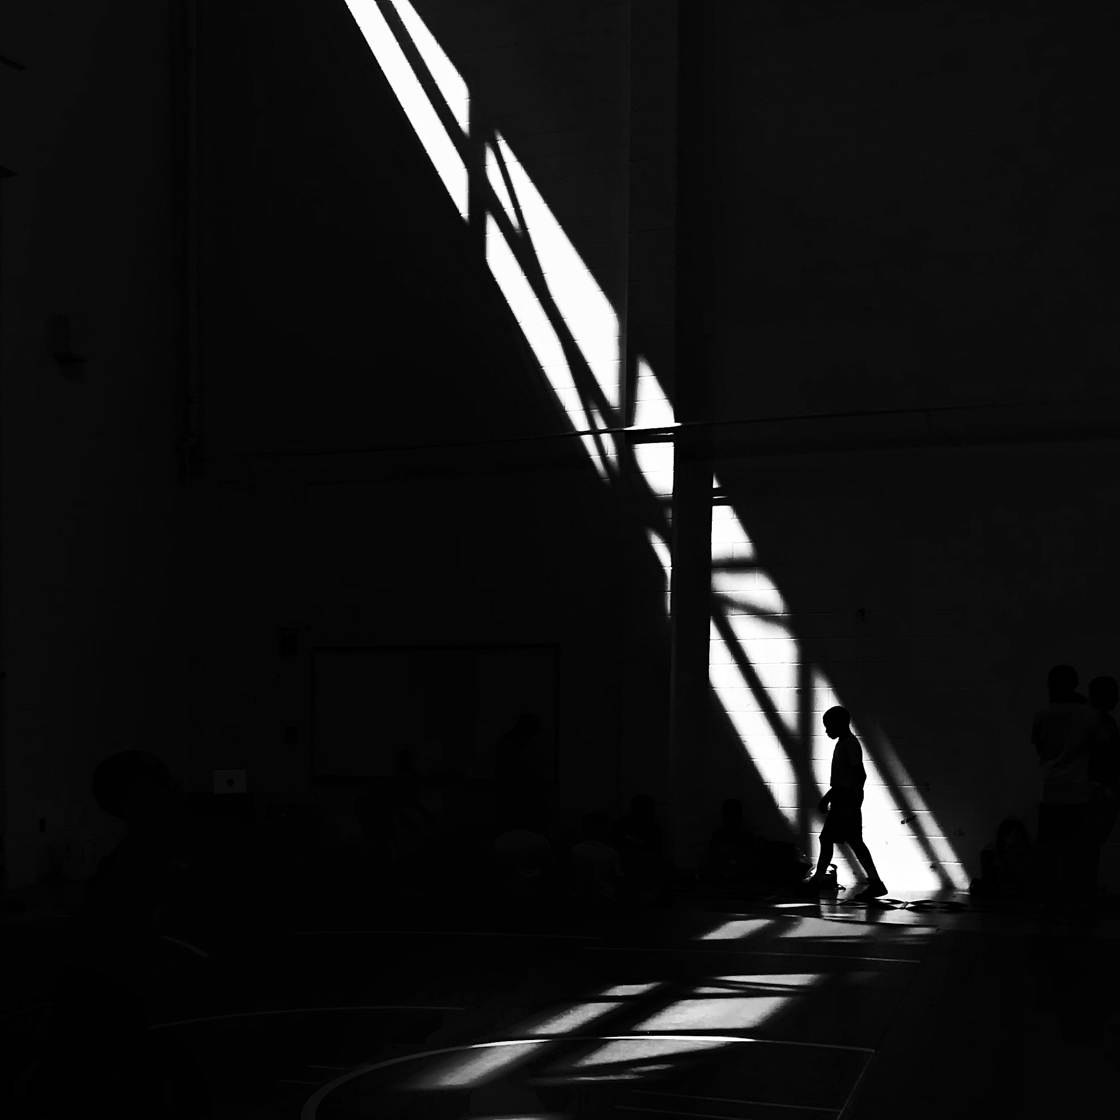 Black and white silhouette photography 47